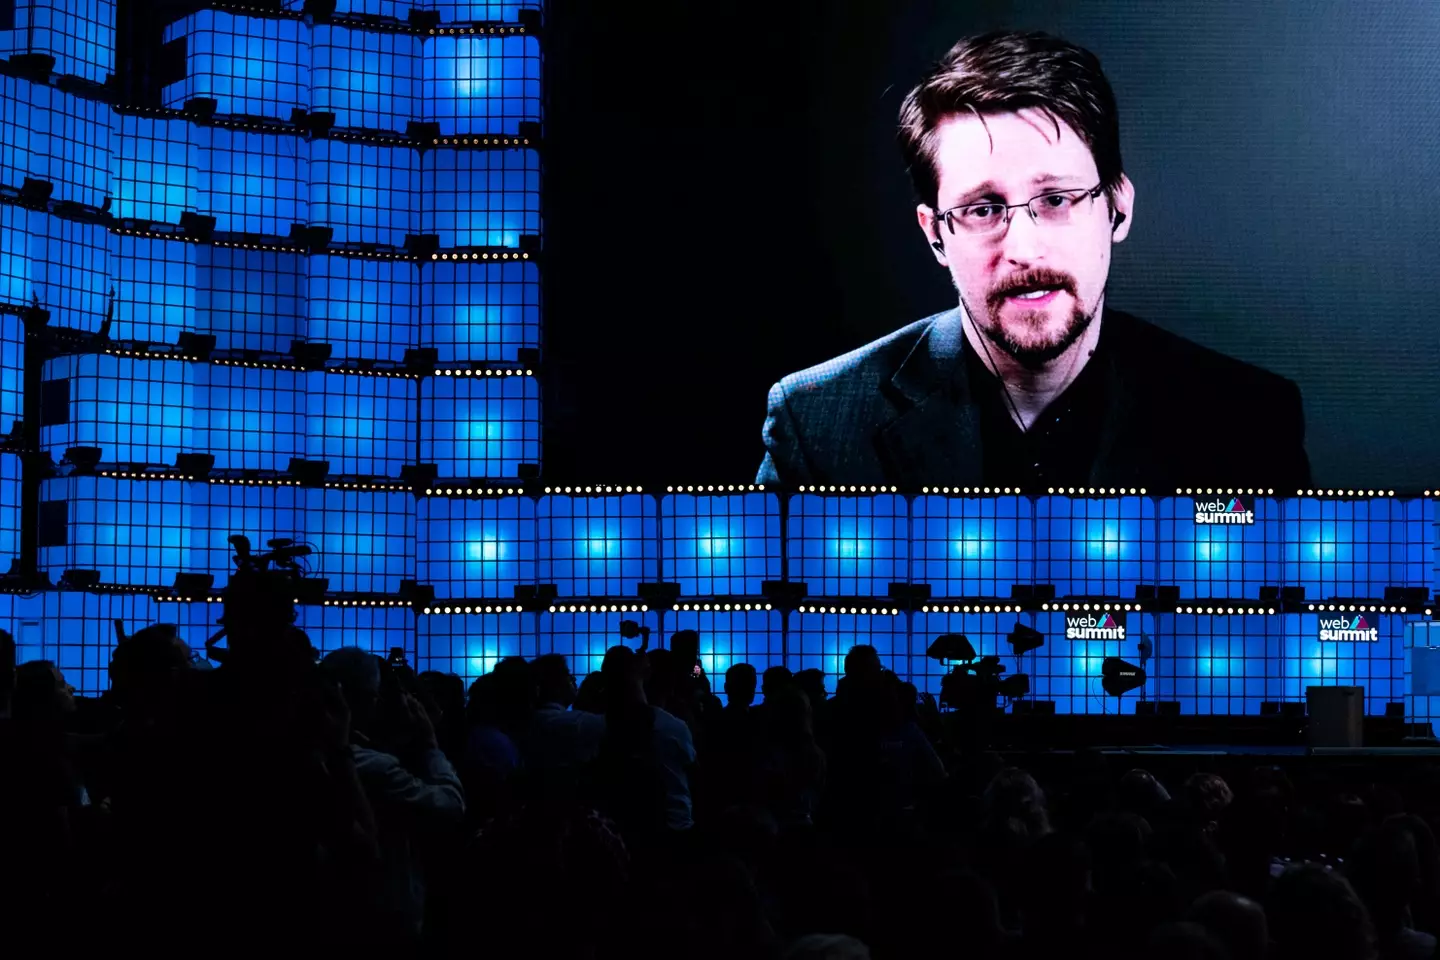 Edward Snowden, president of Freedom of the Press Foundation addresses the audience via web conference in 2019.